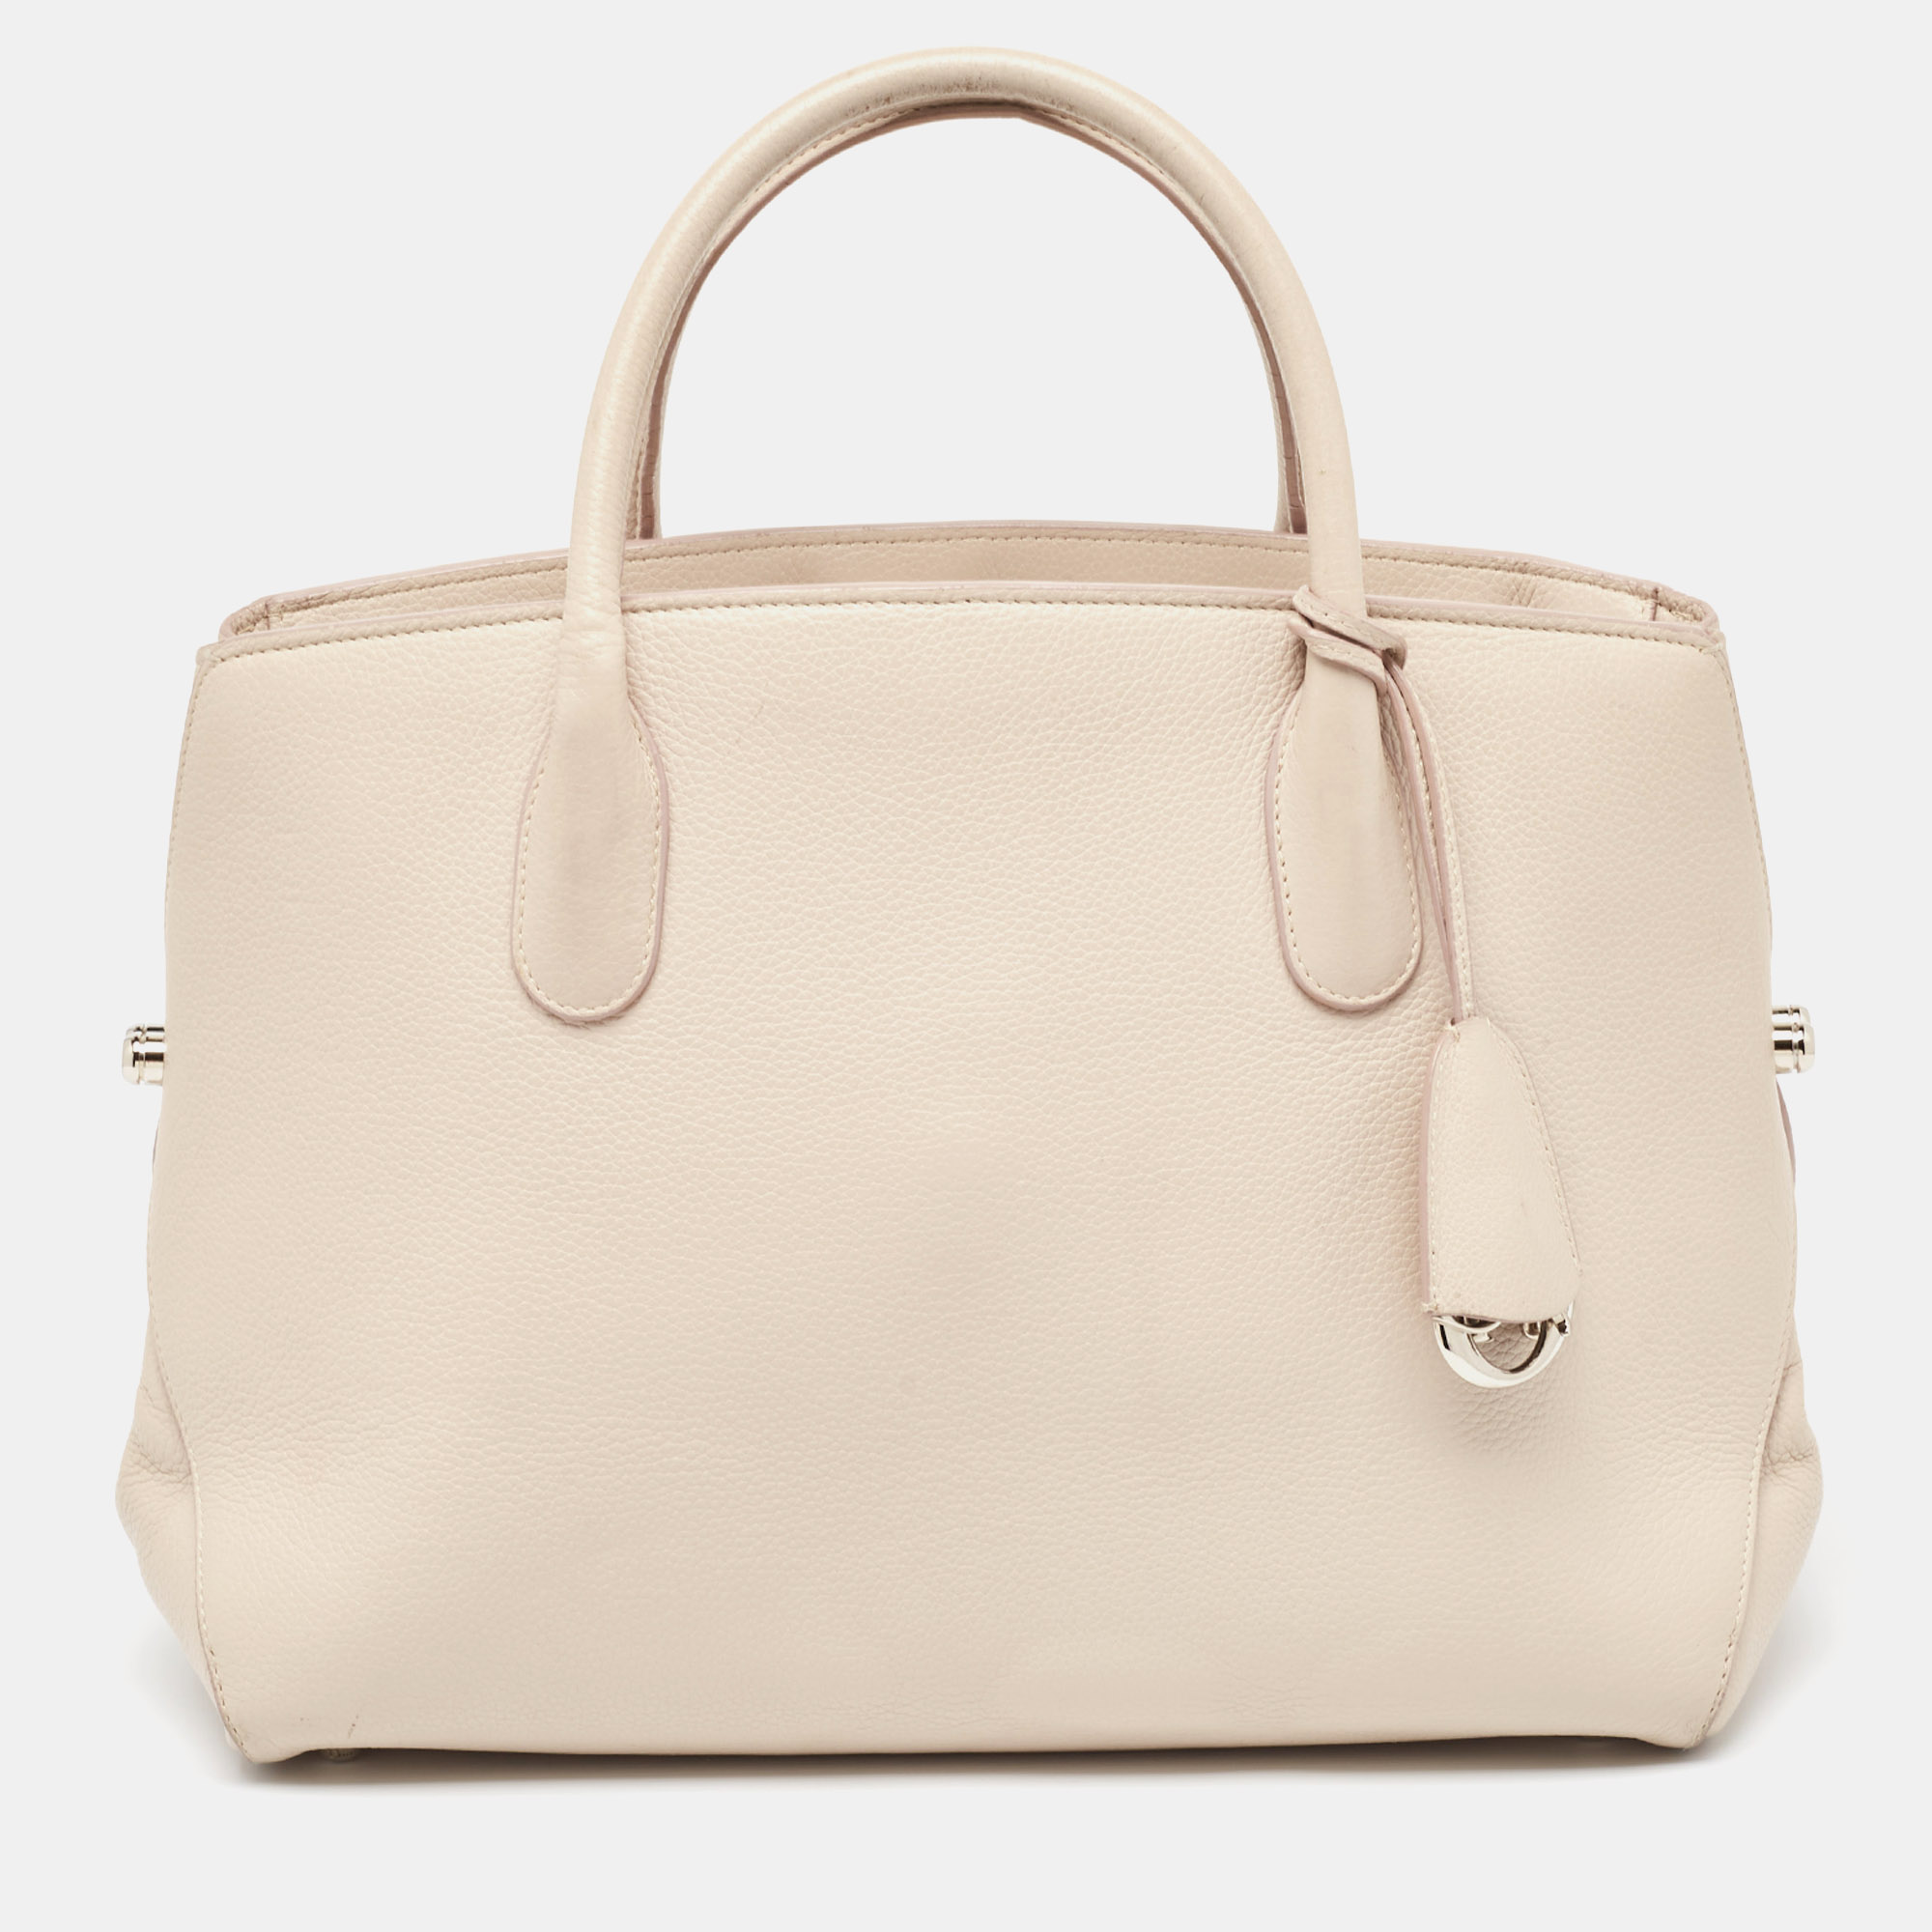 Dior light cream leather large open bar tote